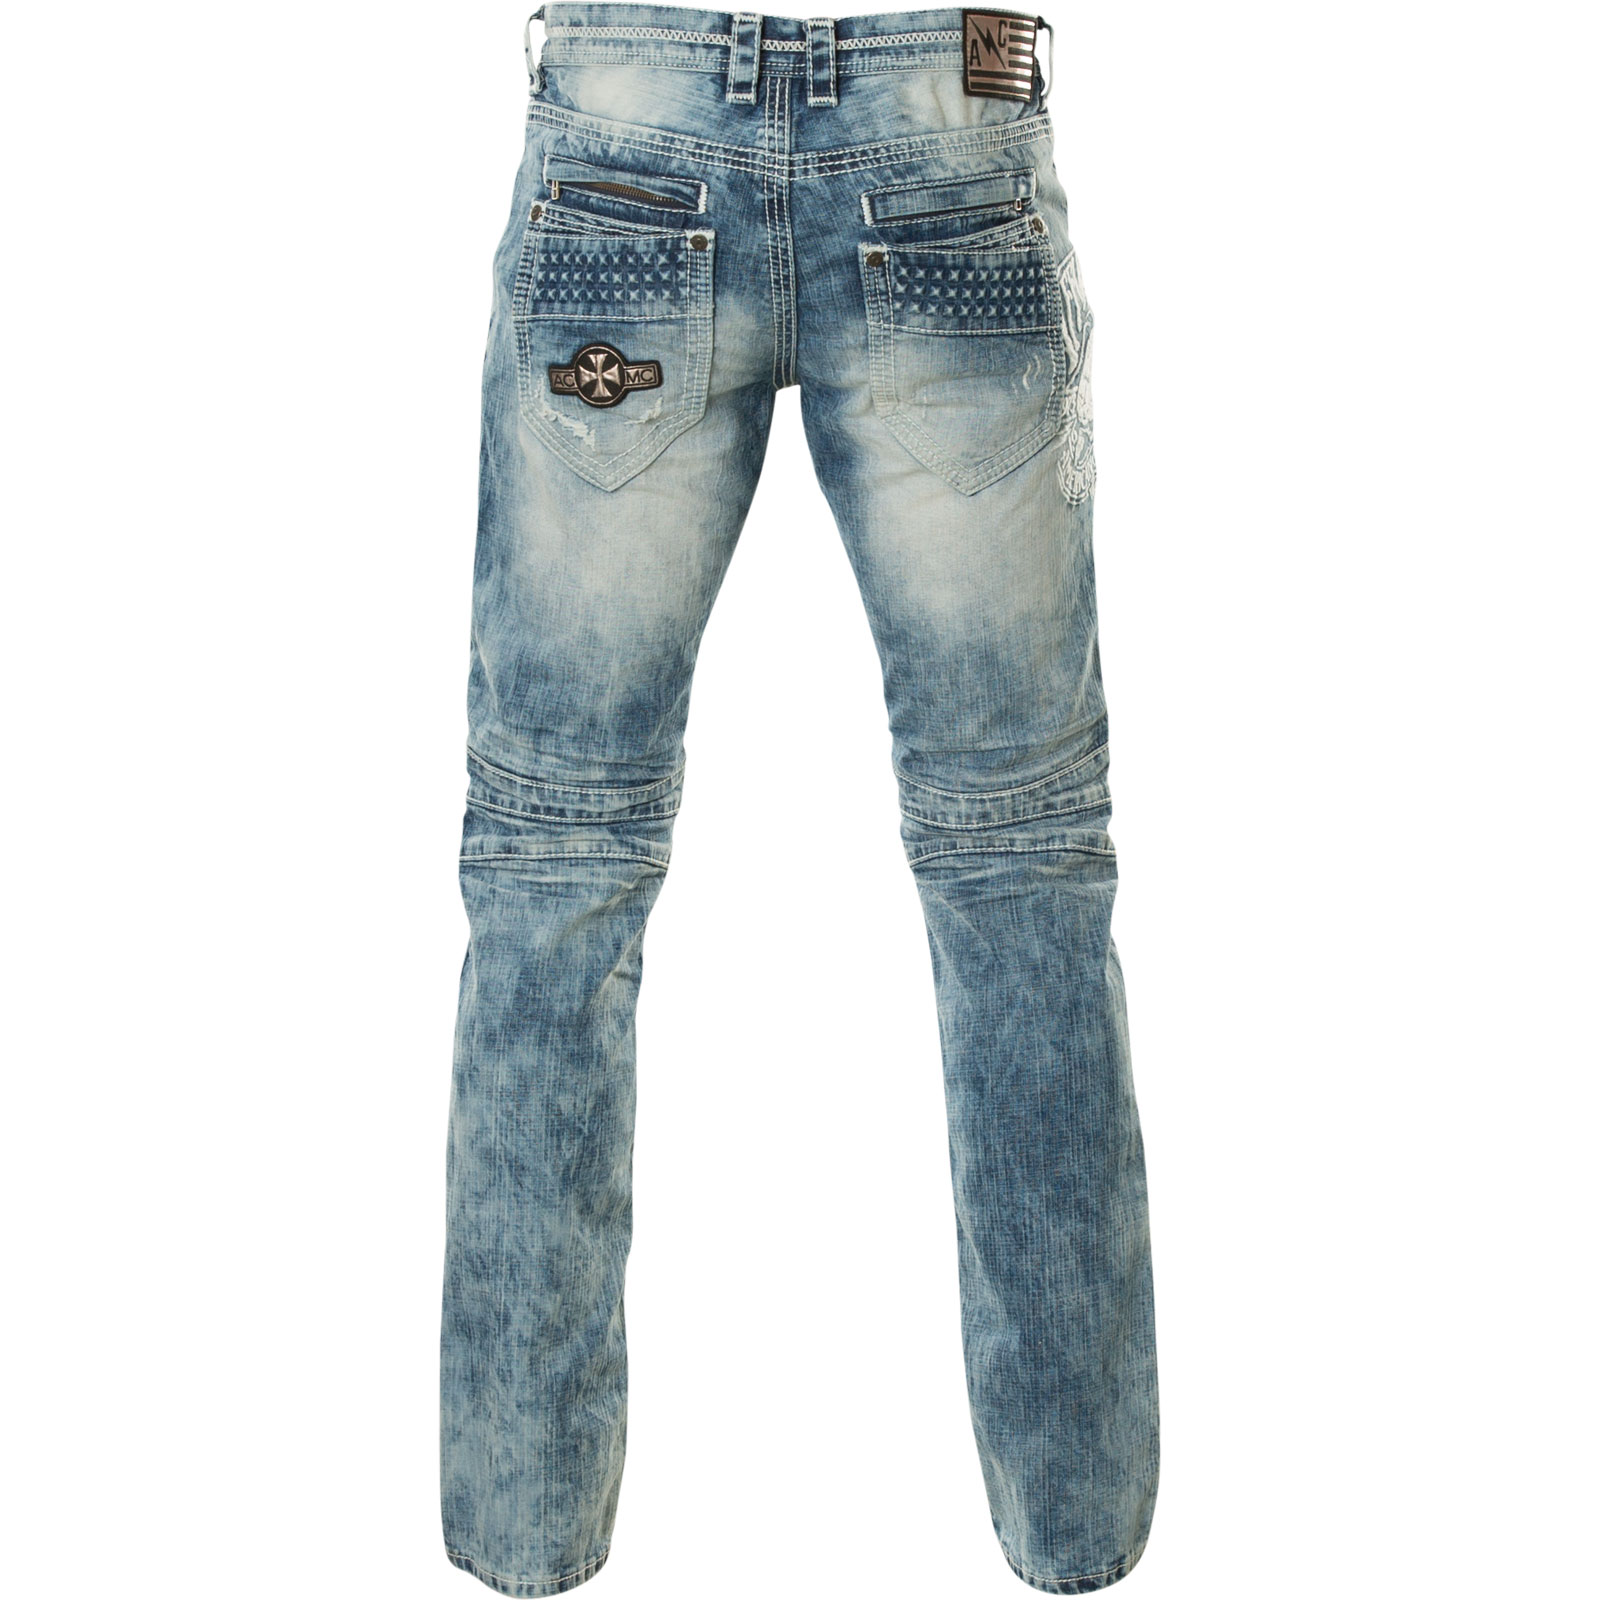 Affliction Jeans Gage Relent Fletch with decorative seams, patch